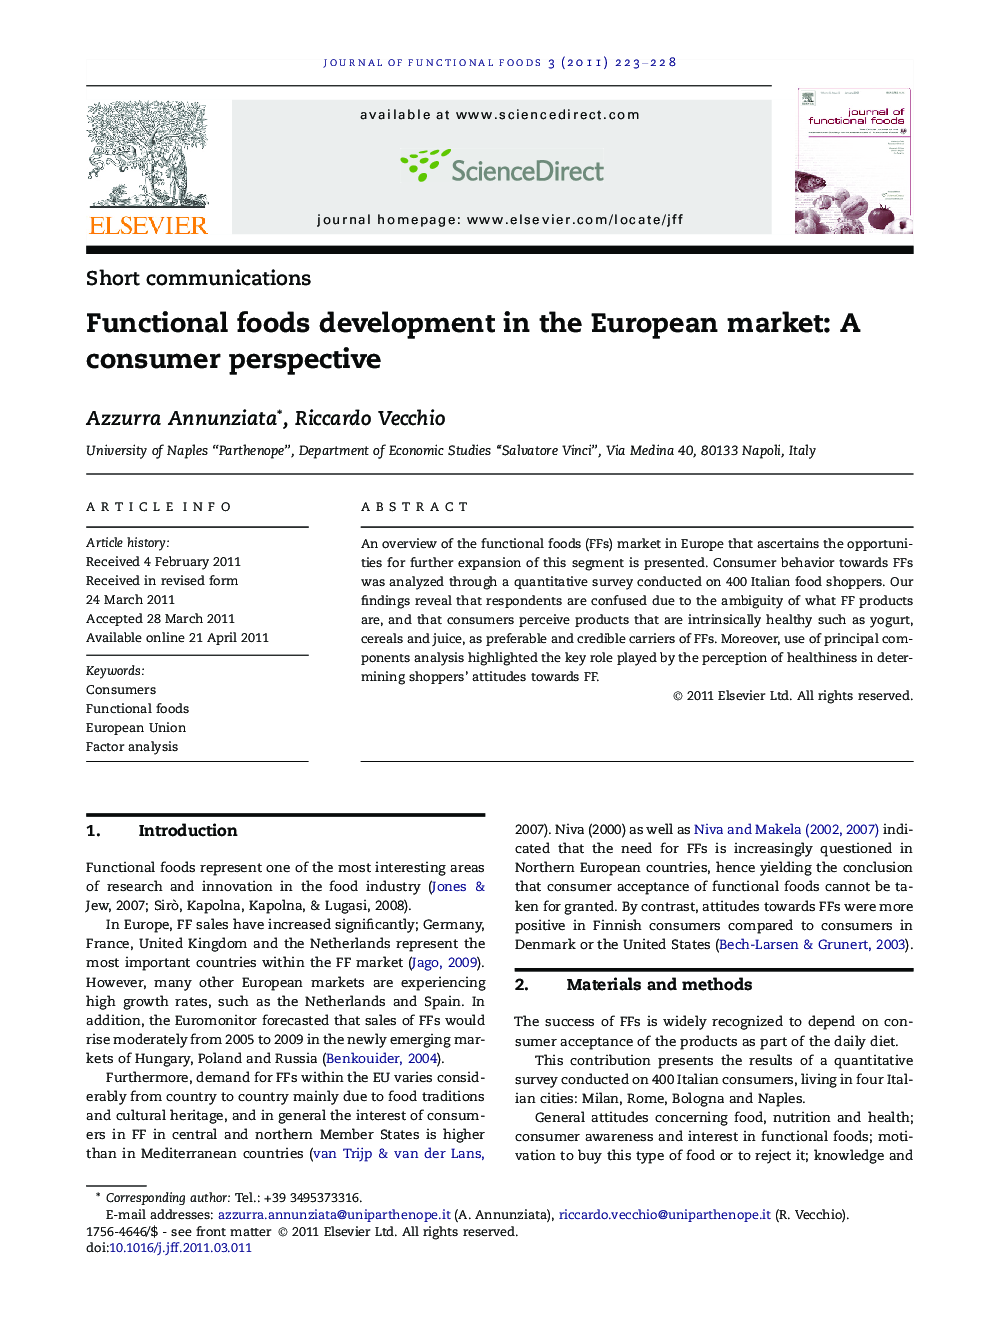 Functional foods development in the European market: A consumer perspective